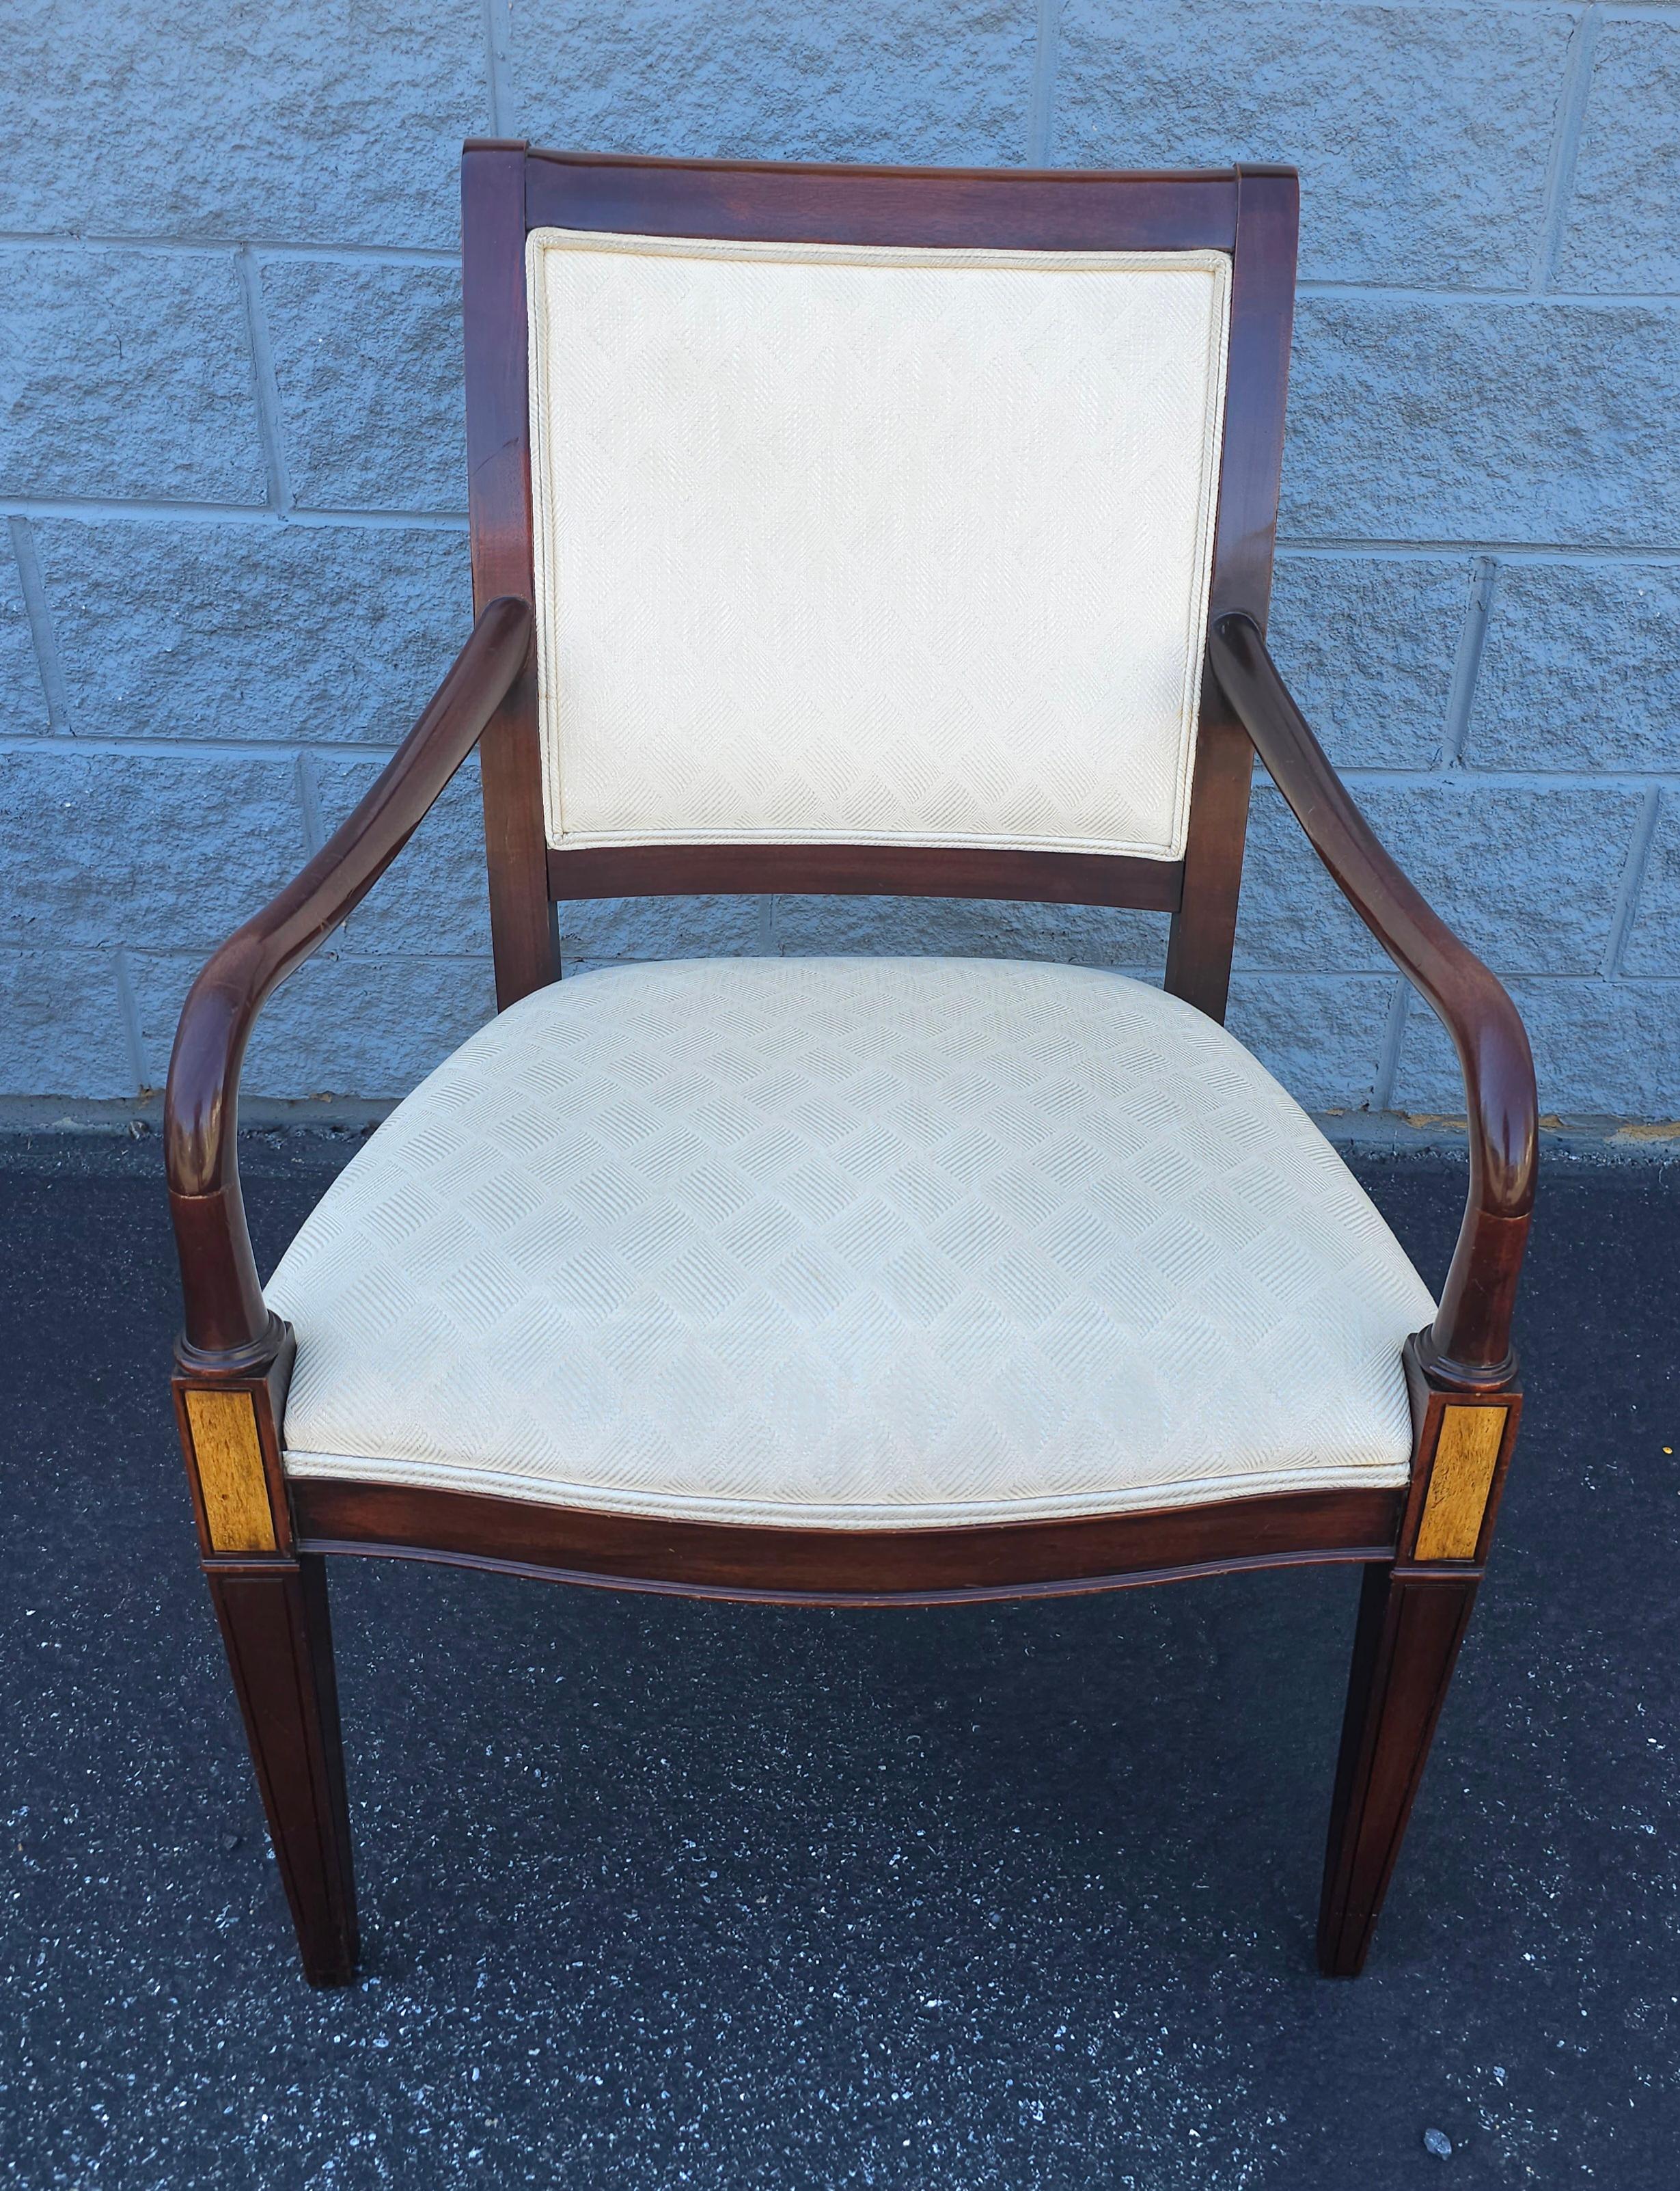 American 20th C. Hickory Chair Federal Style Mahogany Inlaid and Upholstered Arm Chair For Sale